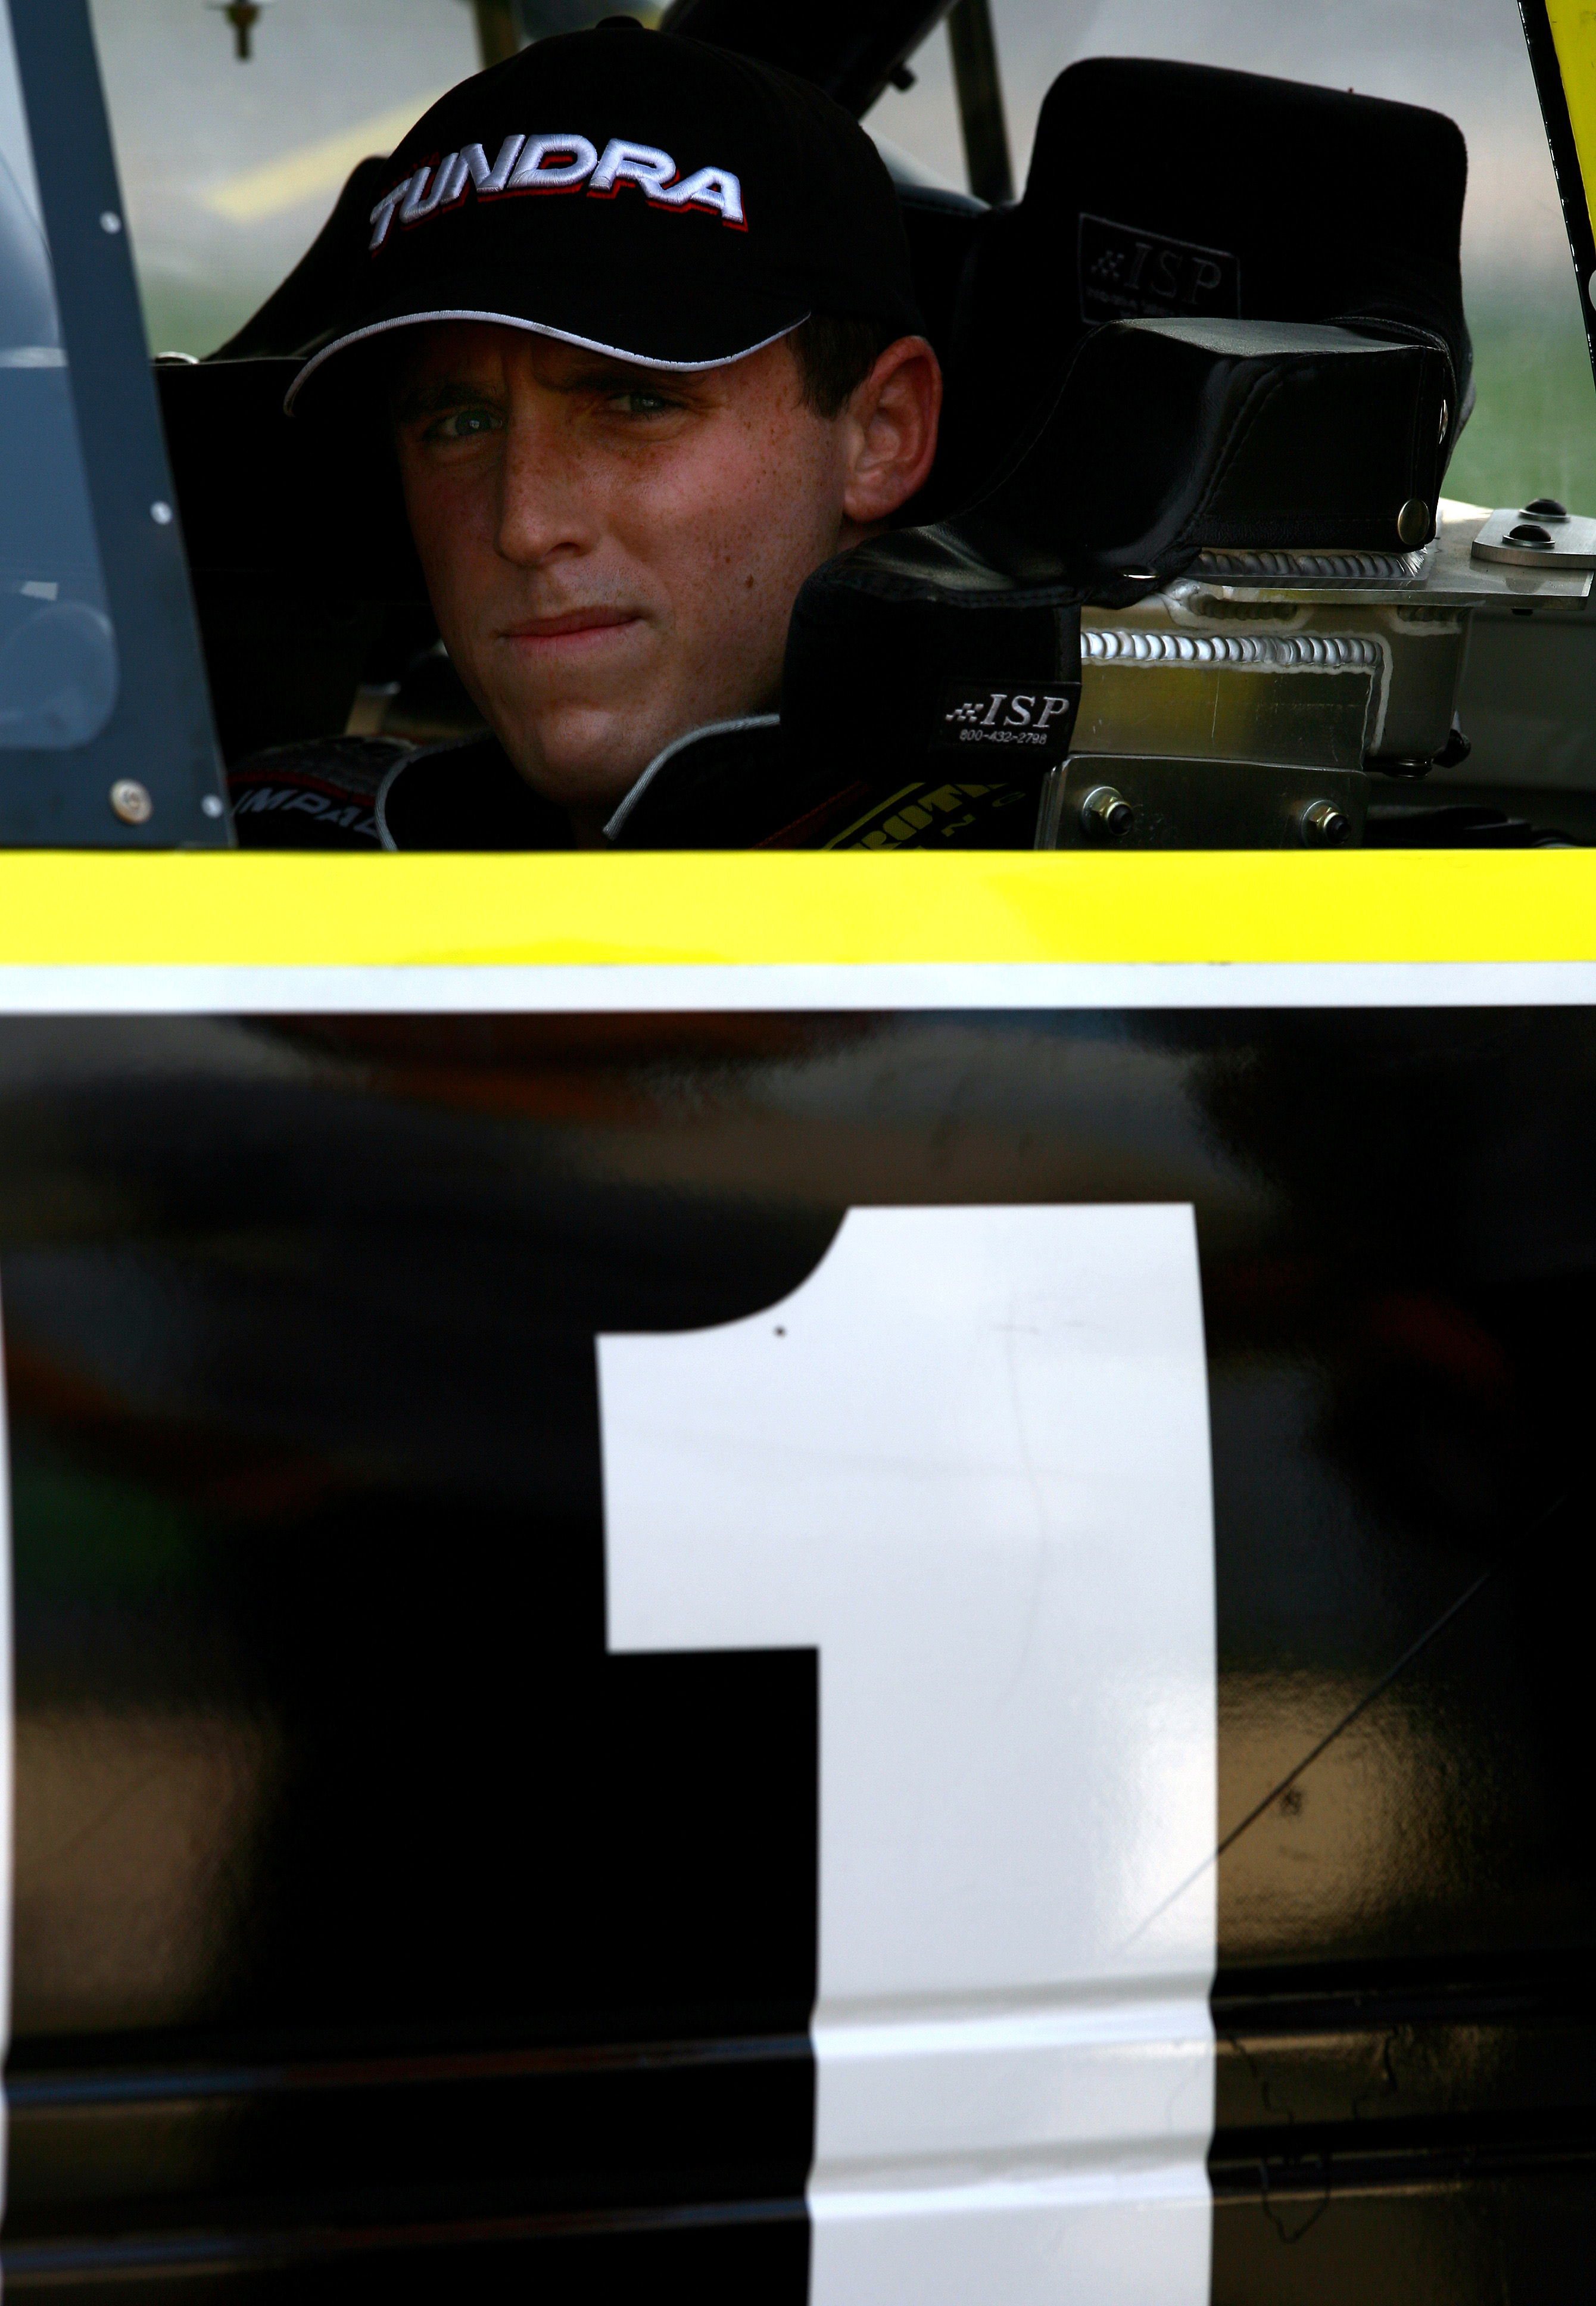 FORT WORTH- JUNE 7: Aaron Fike driver of the #1 RFMS/Red Horse Racing during qualifying for the NASCAR Craftsman Truck Series Sam's Town 400 on June 7, 2007 at Texas Motor Speedway  in Fort Worth, Texas. (Photo by Gavin Lawrence/Getty Images)